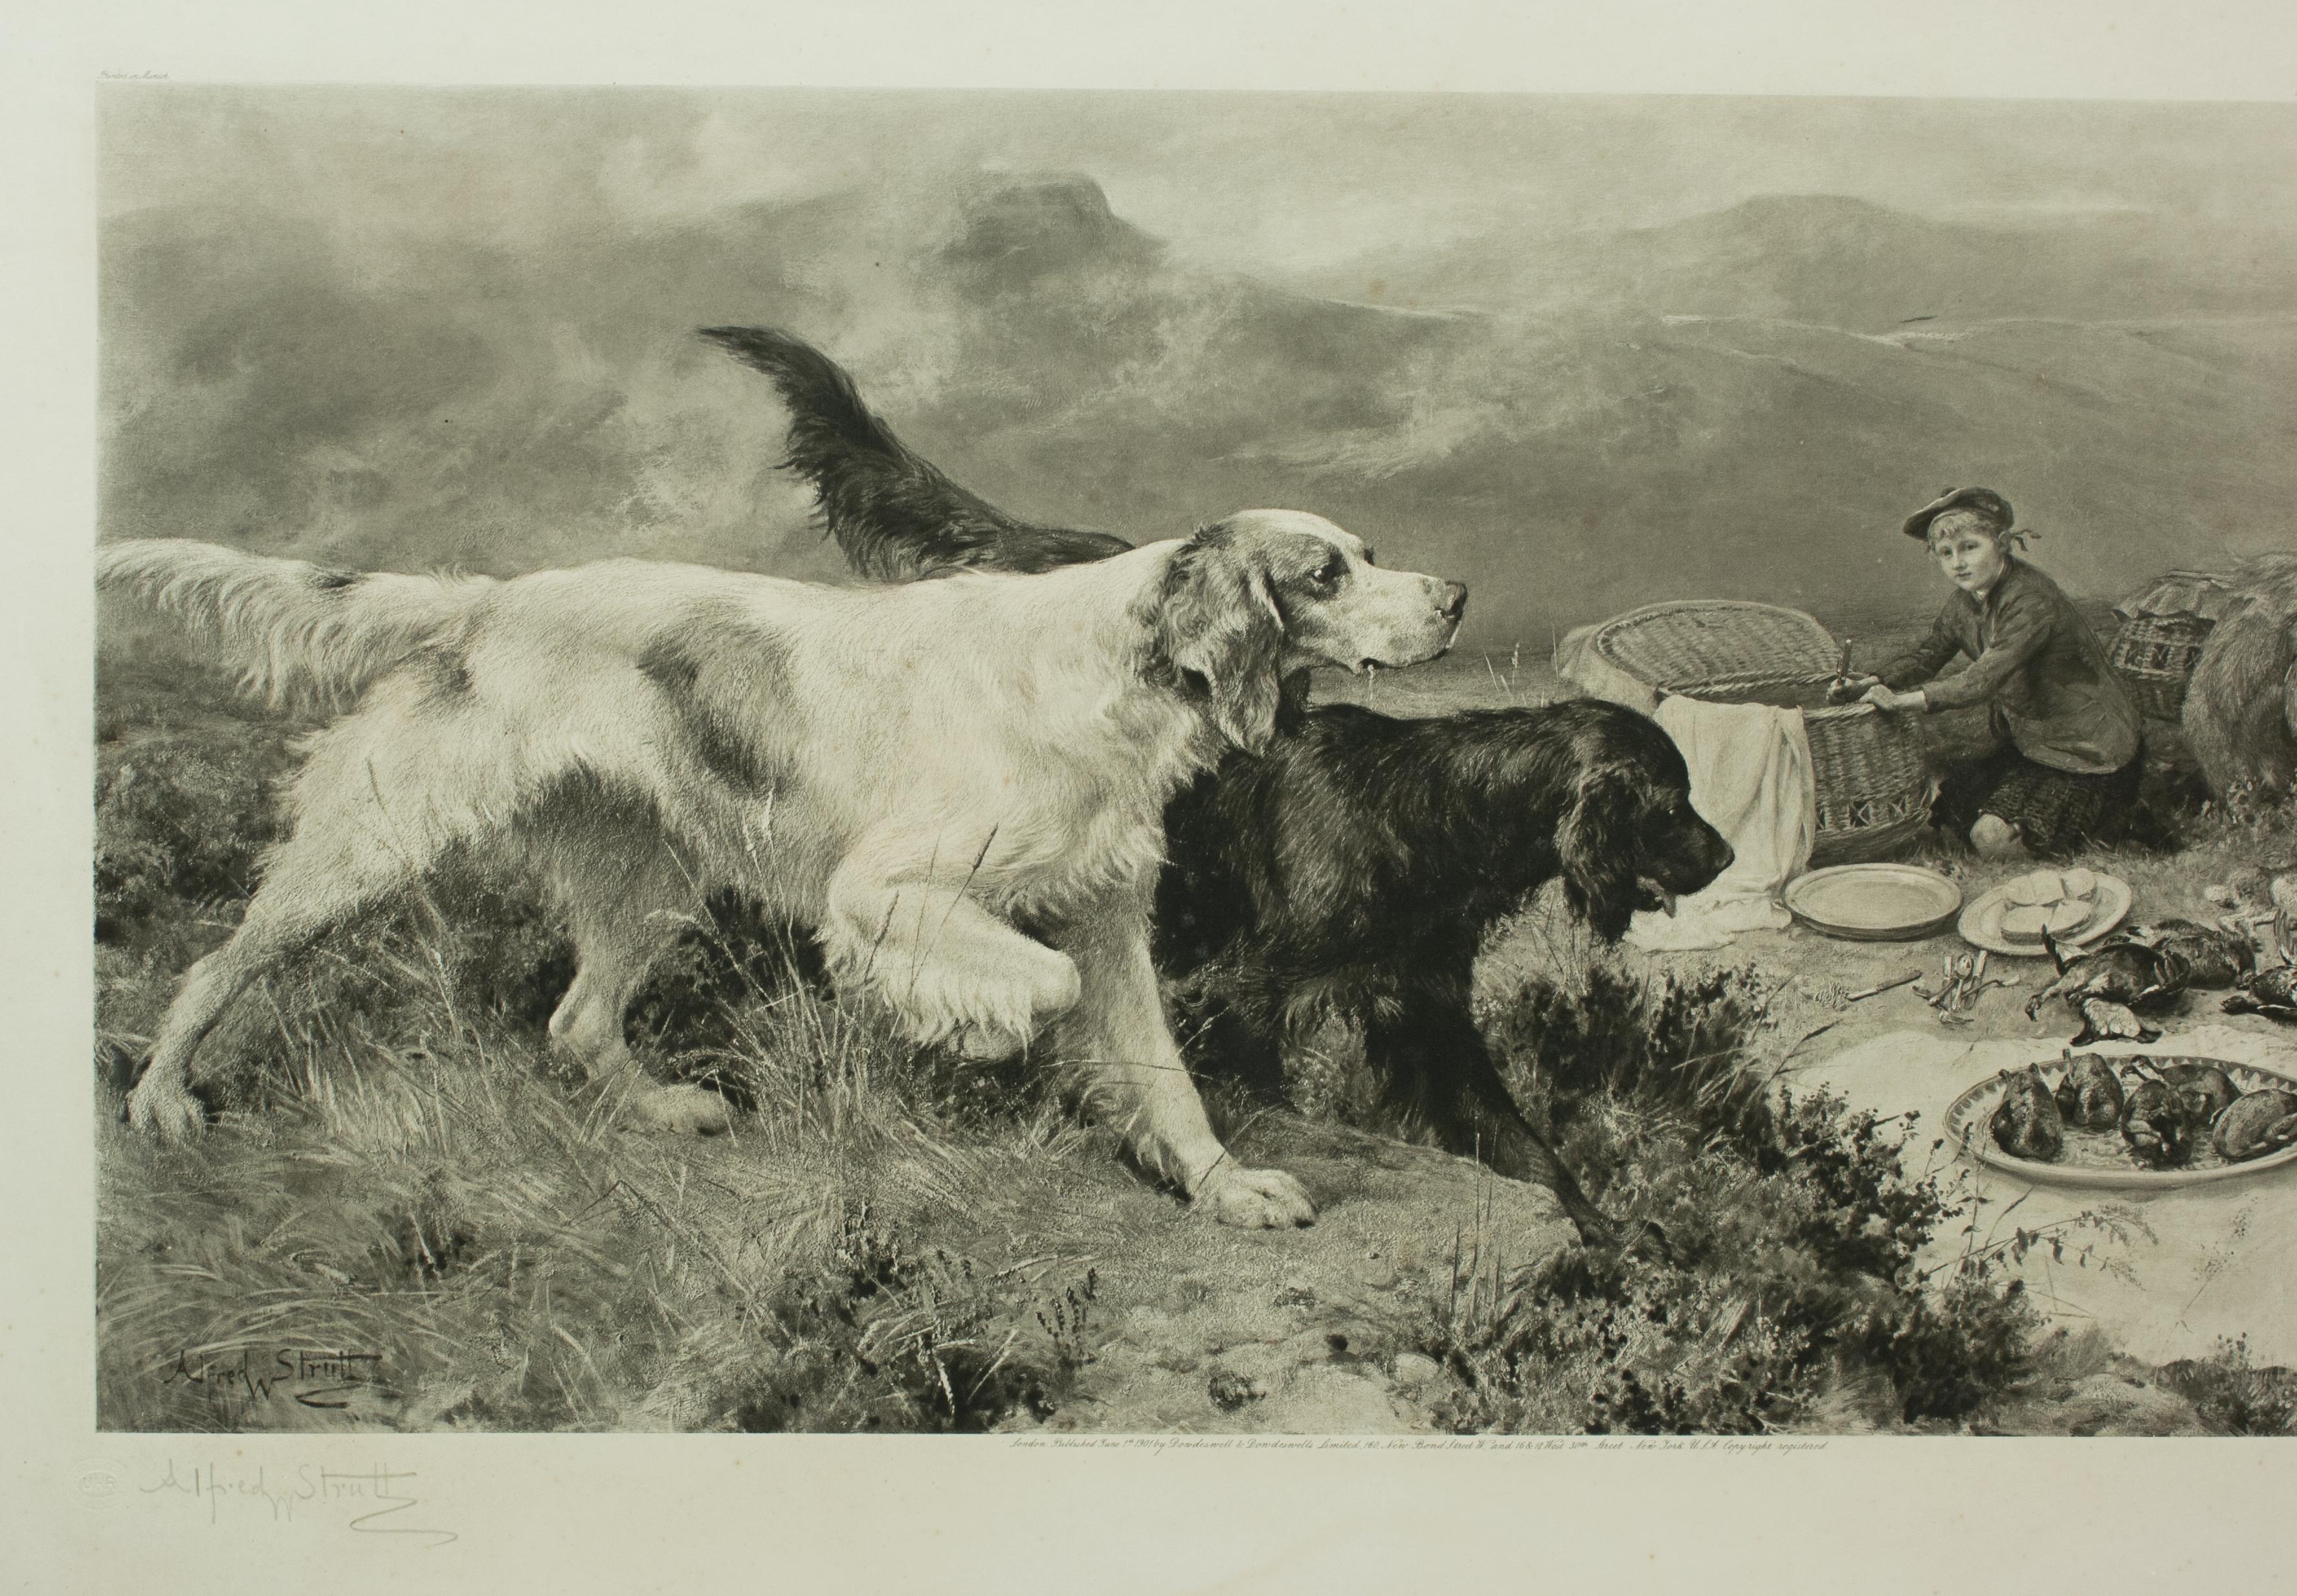 Alfred Strutt game picture, Gamekeeper's Highland Repast.
The picture is framed in an old oak frame and shows a young Gamekeeper in the Highlands with his two companions (two setters) and his pony. He can be seen laying out a meal (sandwiches and